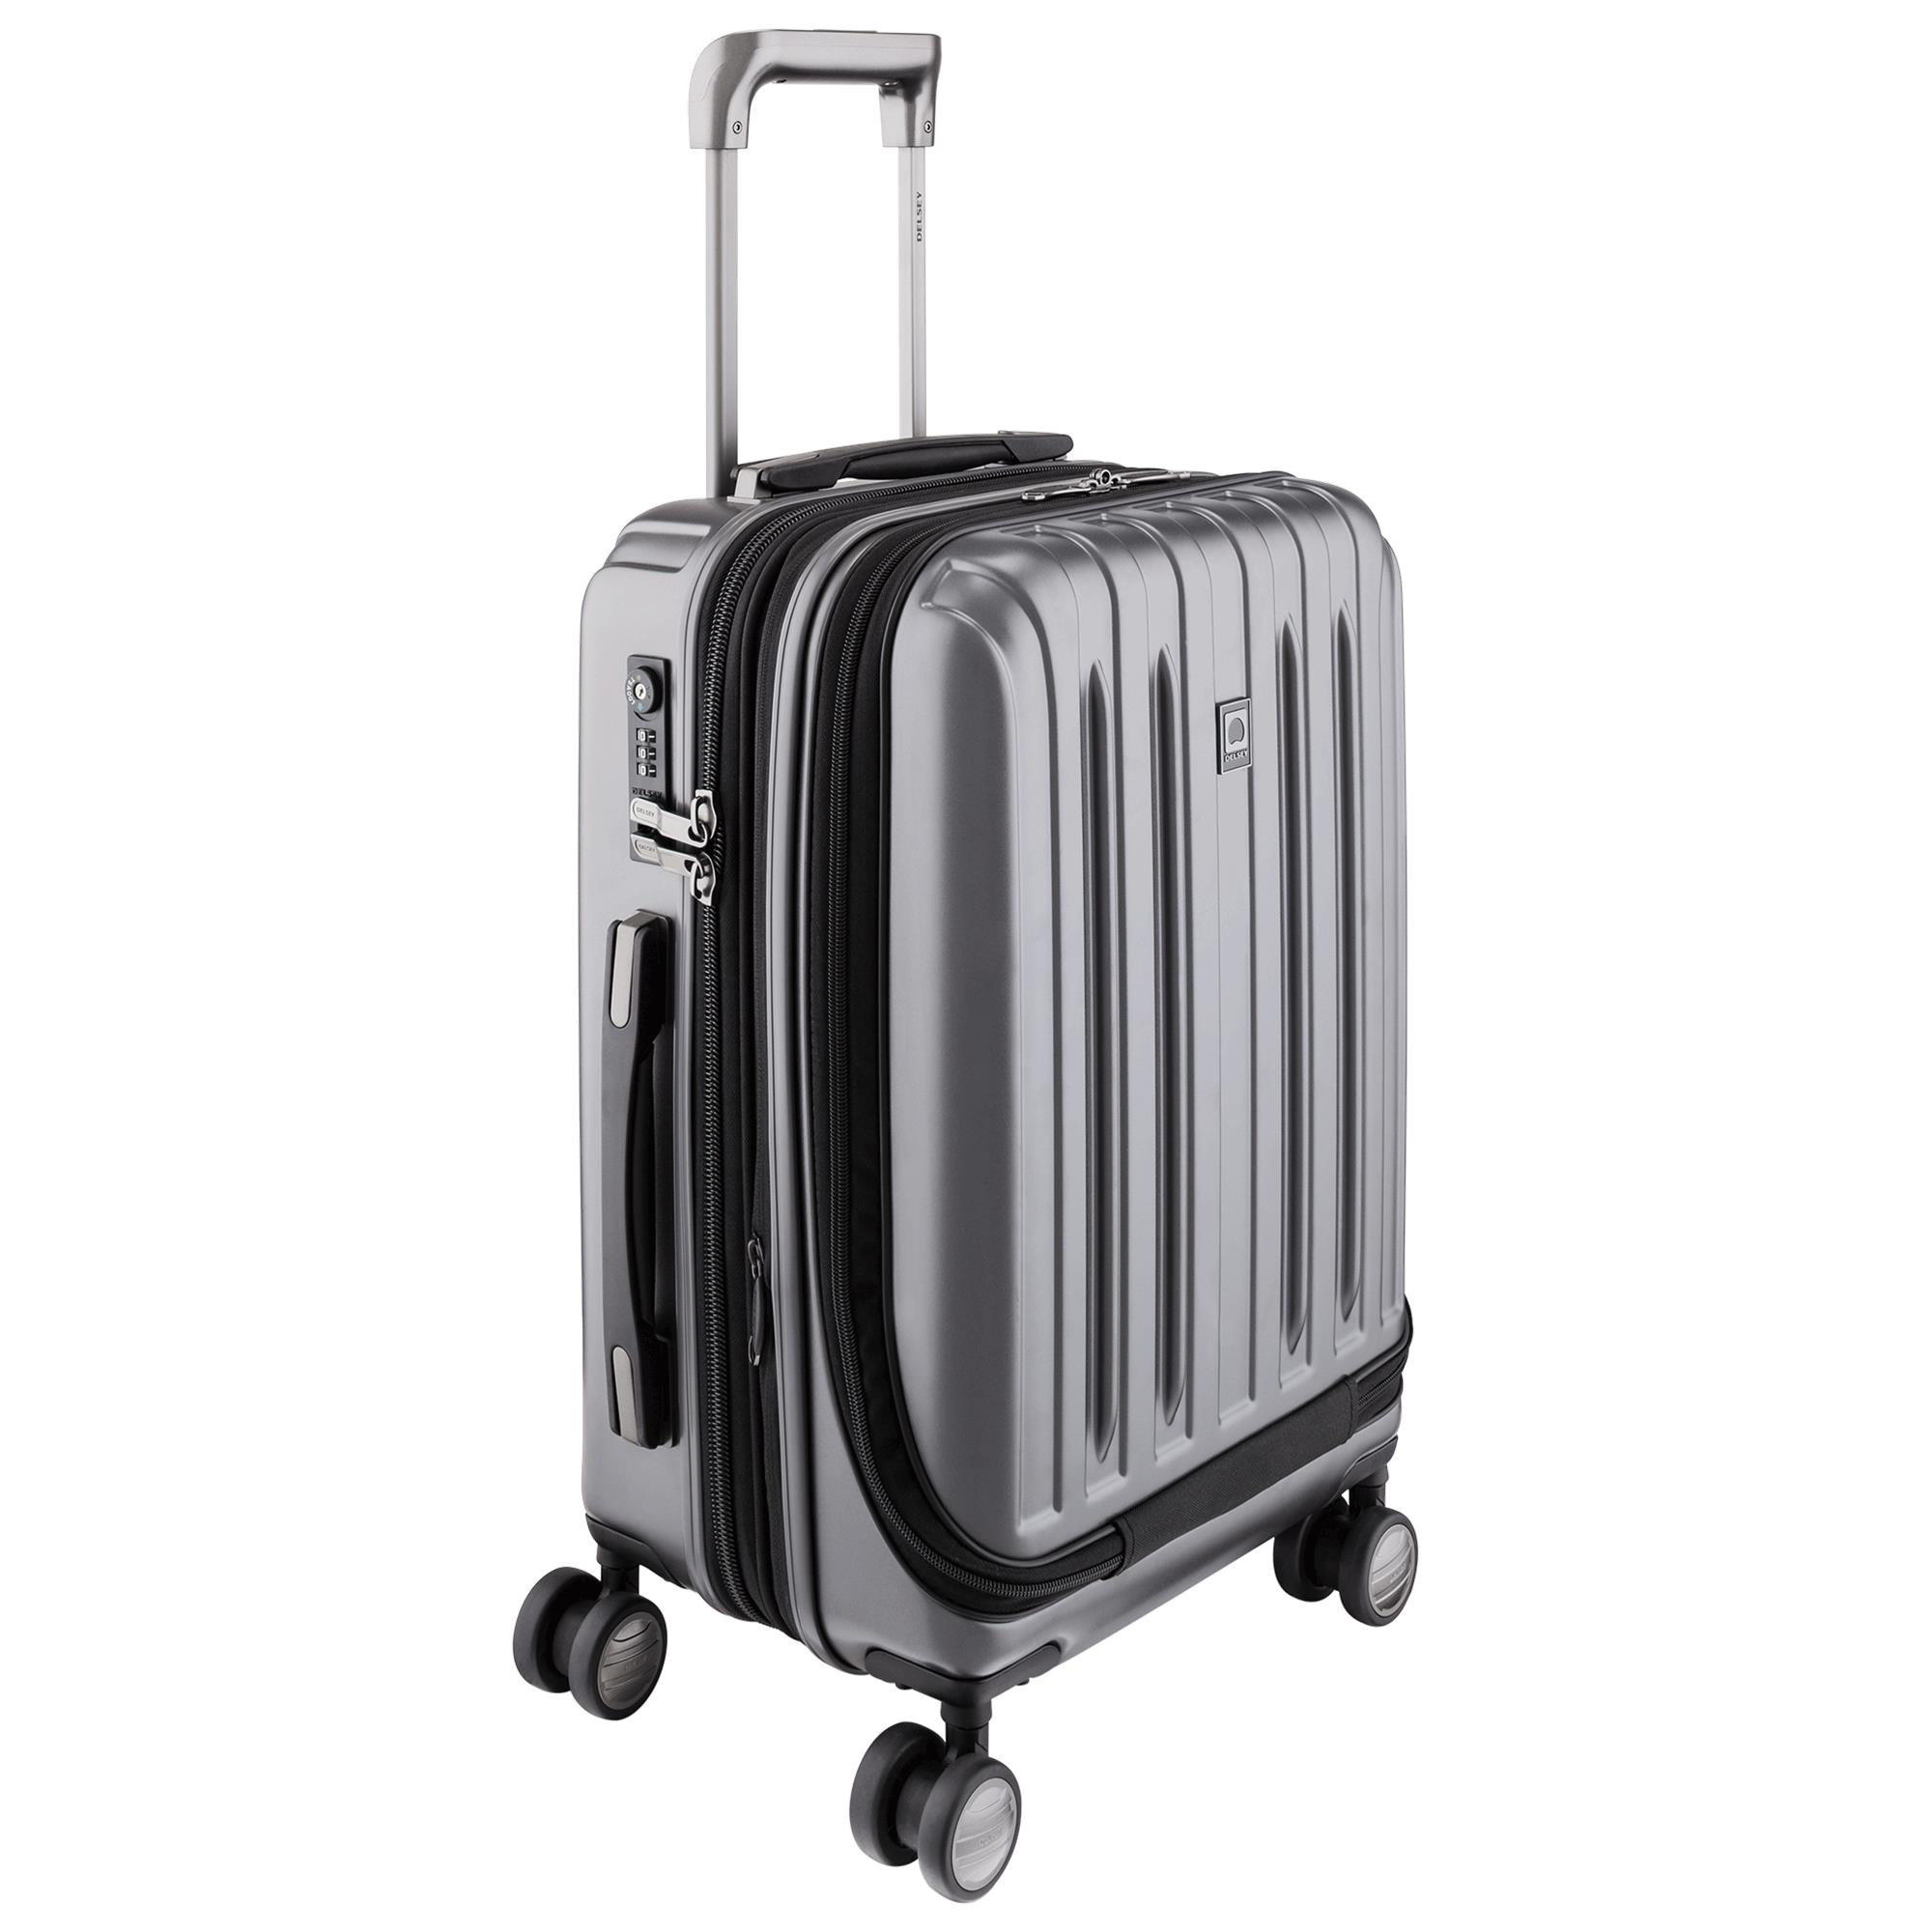 DELSEY Paris Titanium International Carry On Spinner Rolling Luggage ...